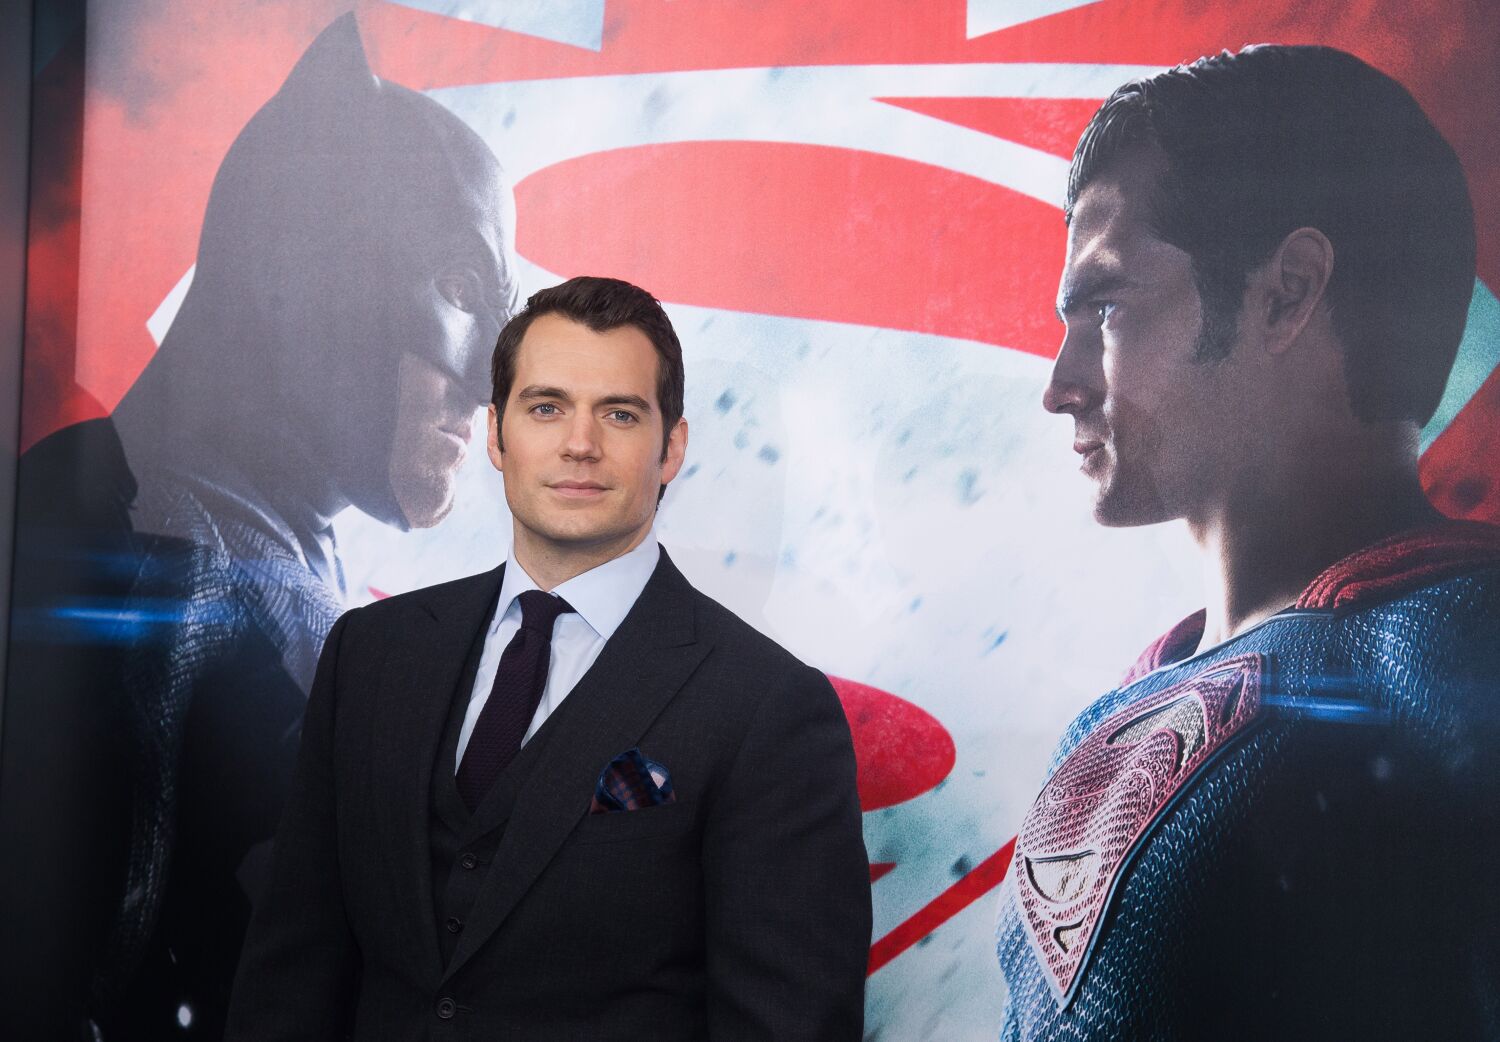 'It's sad news': Henry Cavill out as Superman due to 'changing of the guard' at DC